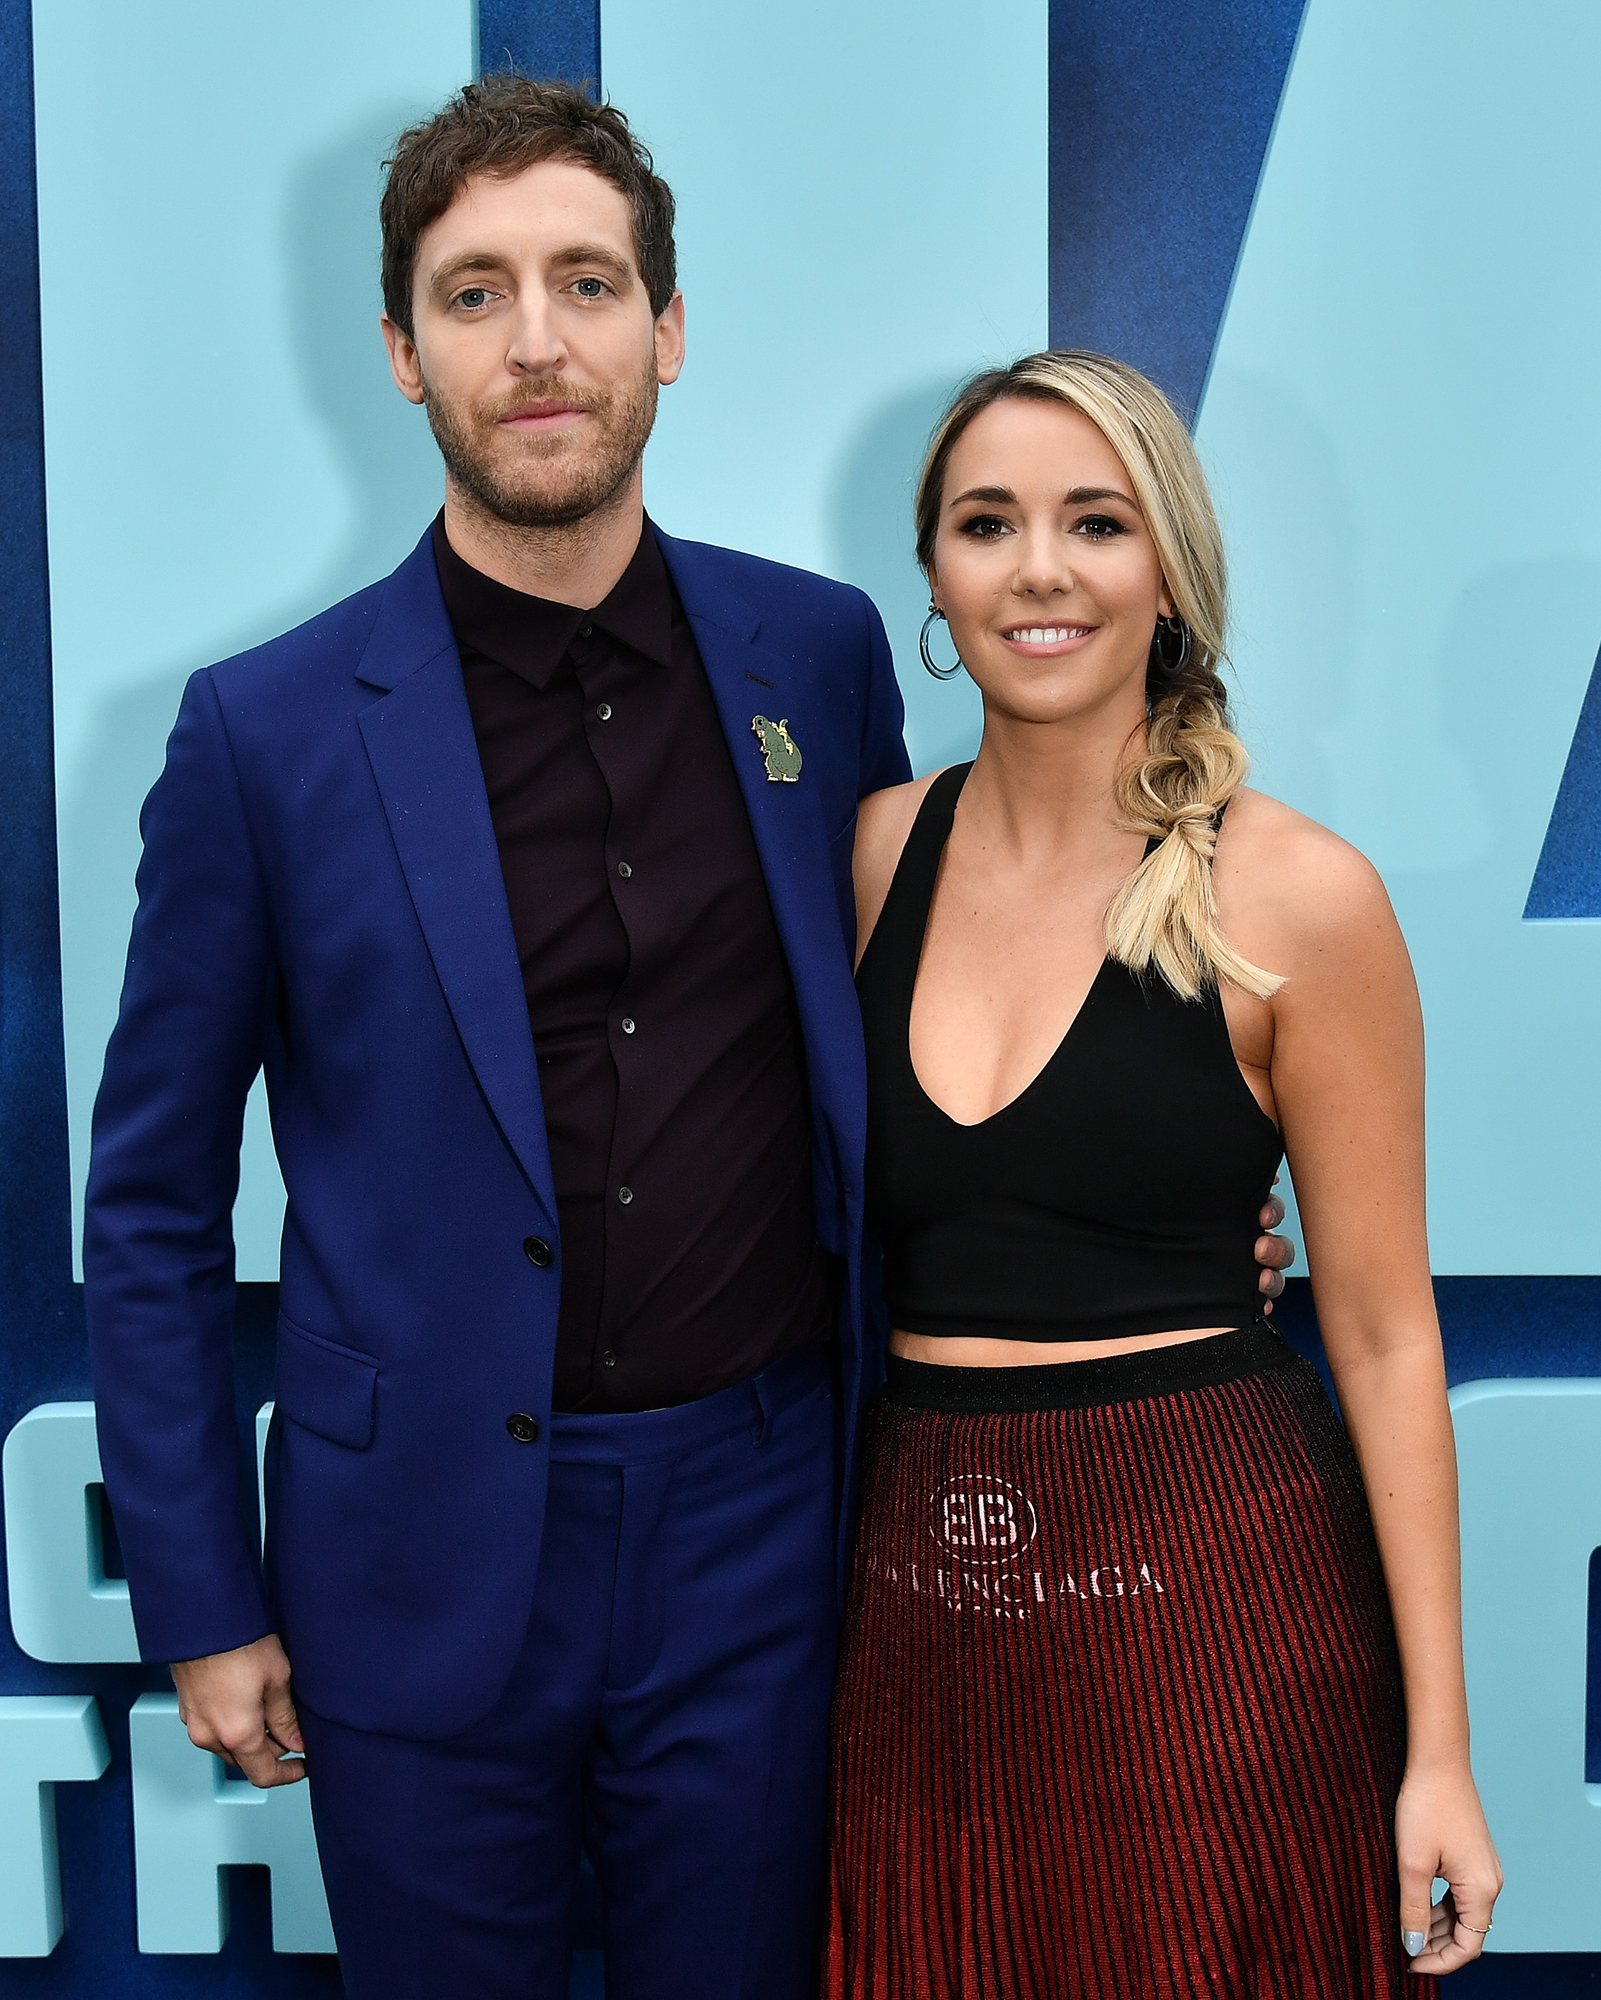 Silicon Valleys Thomas Middleditch Swinging Saved My Marriage photo